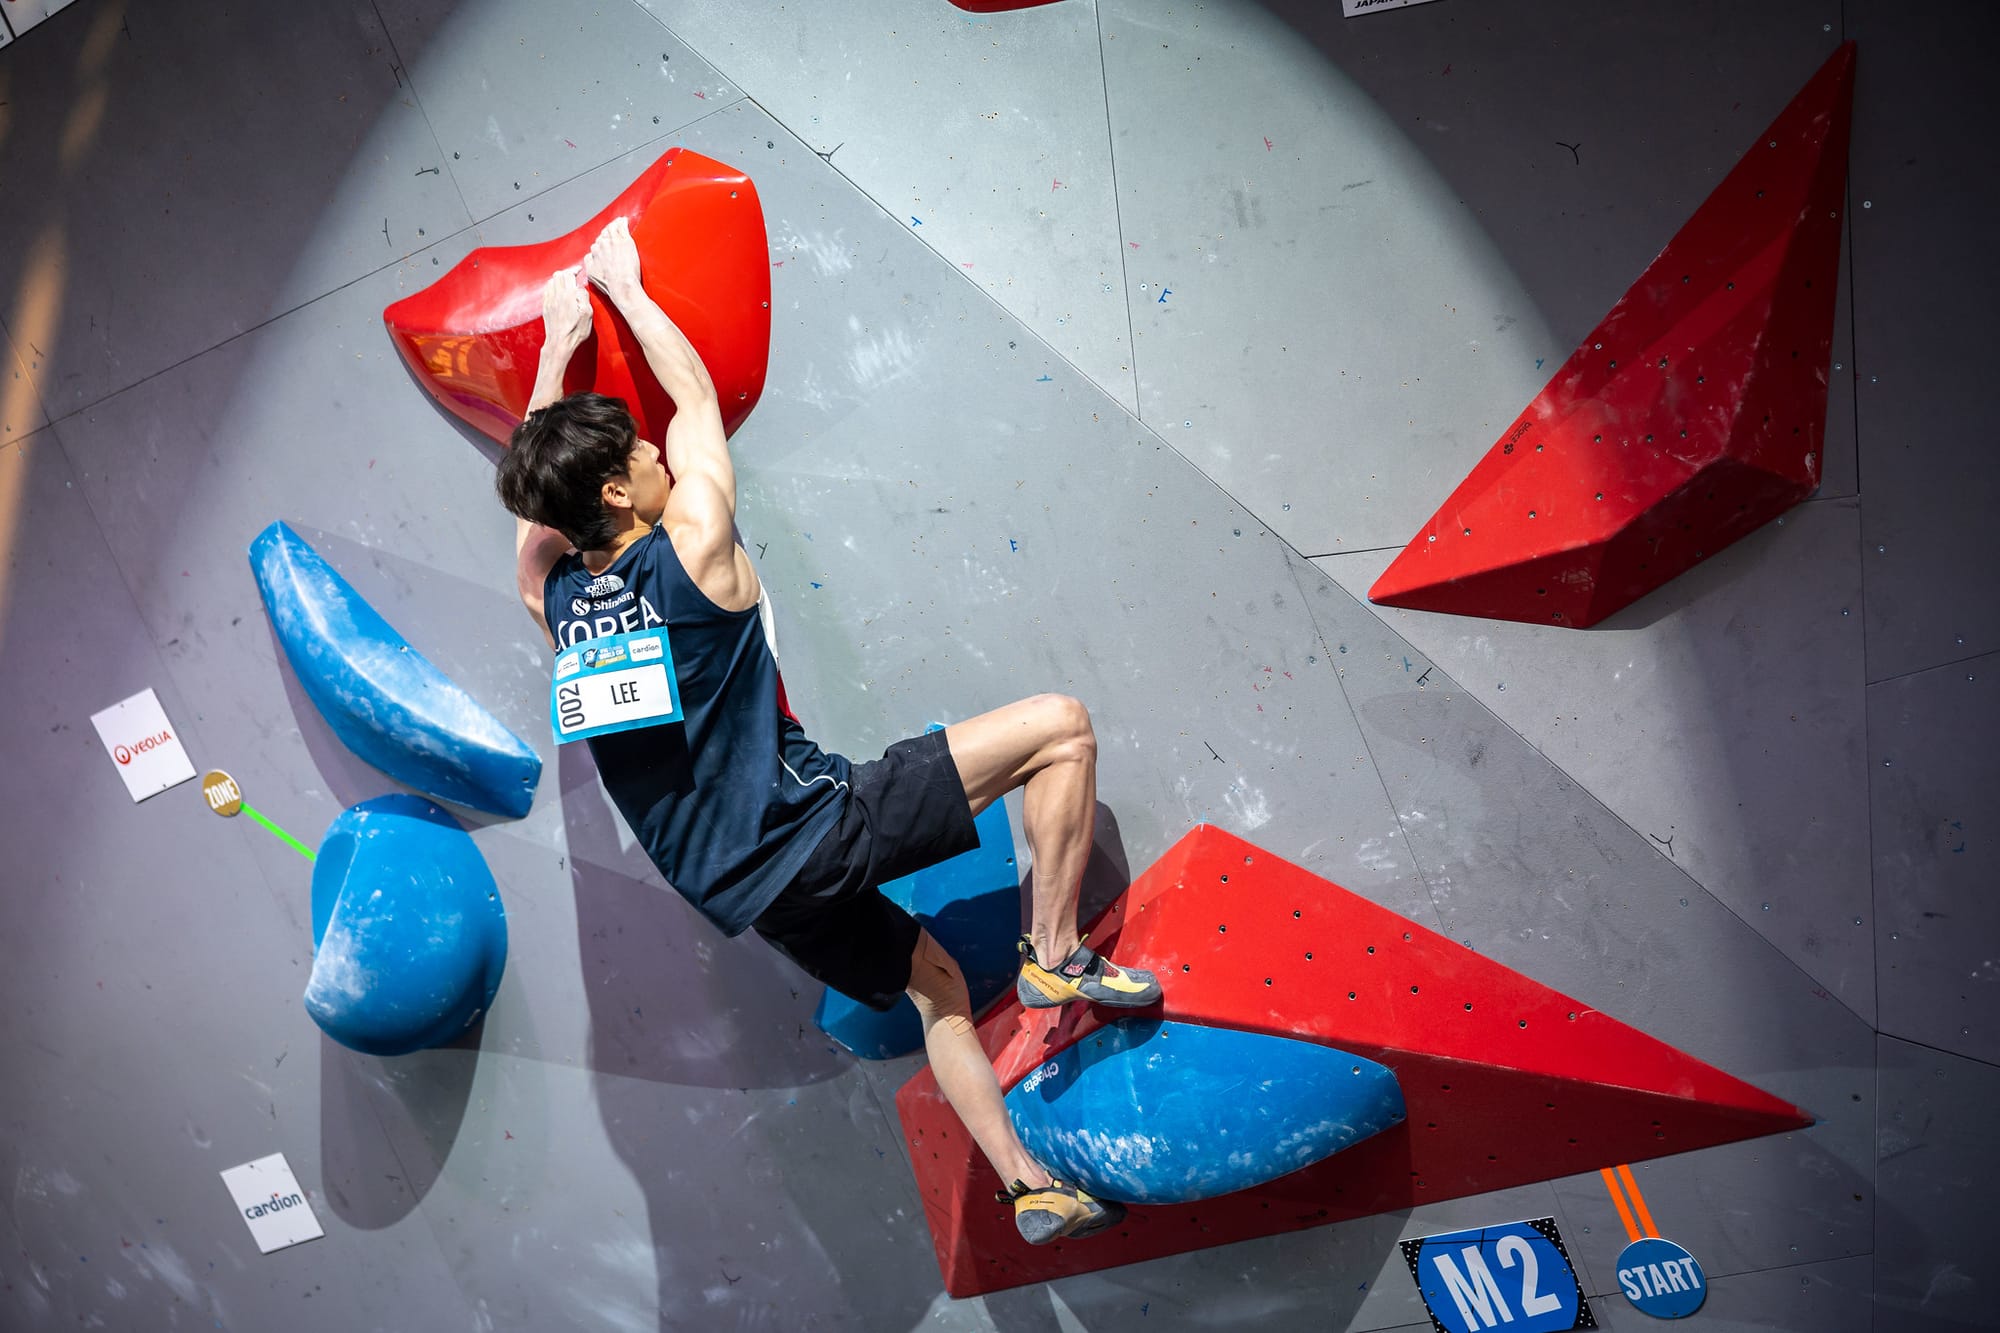 Dohyuni Lee of South Korea competes in the men's Boulder final during the 2023 IFSC World Cup in Prague, Czechia